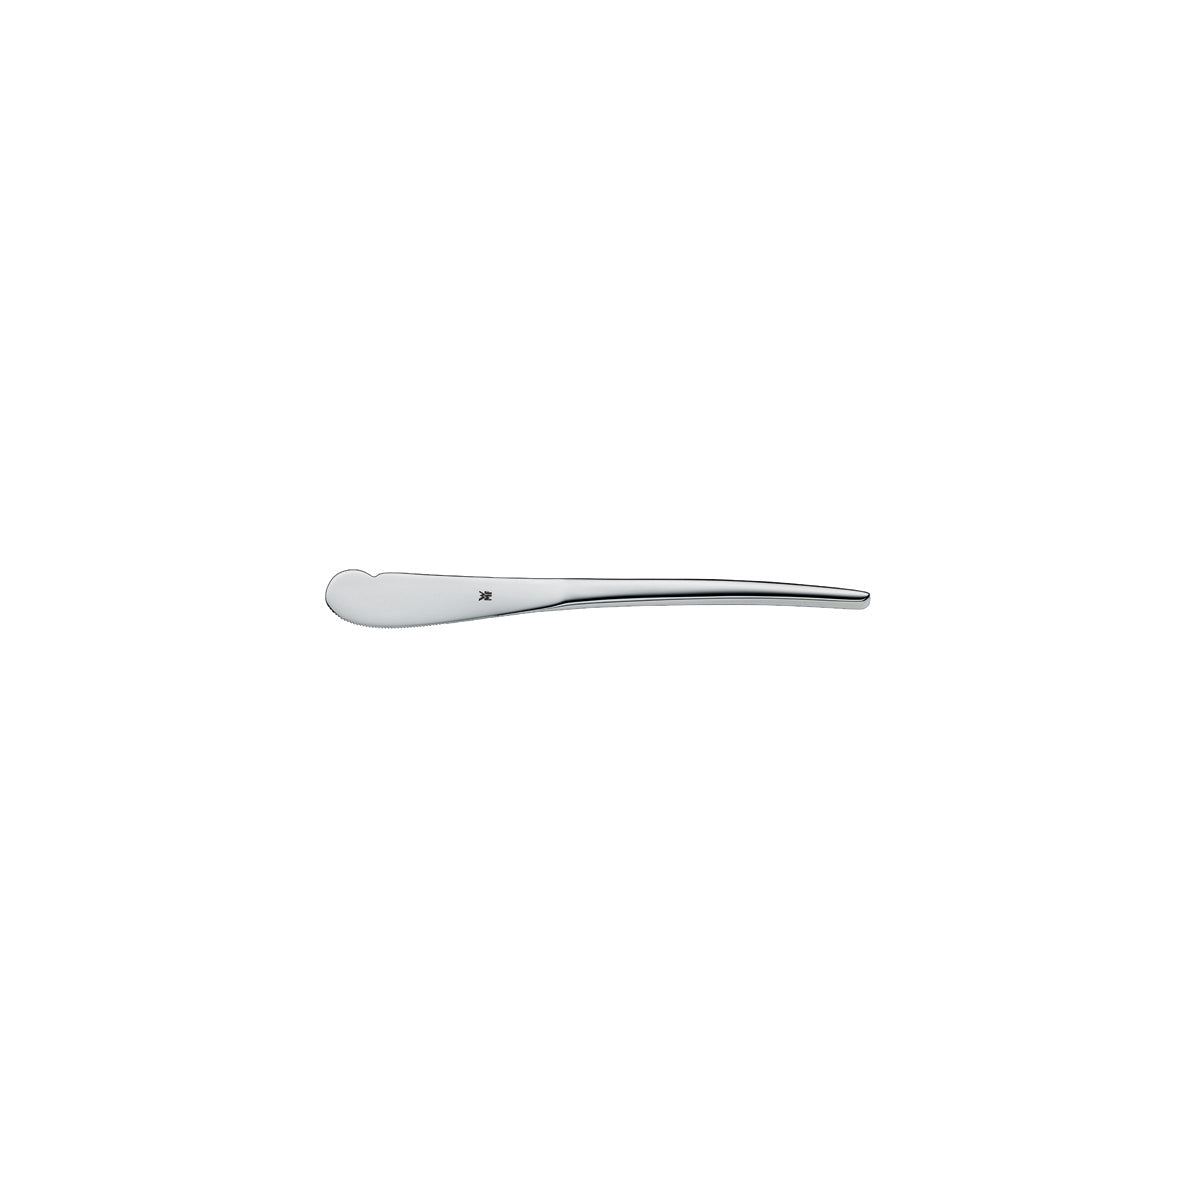 54.7266.6049 WMF Nordic Butter Knife Stainless Steel Tomkin Australia Hospitality Supplies